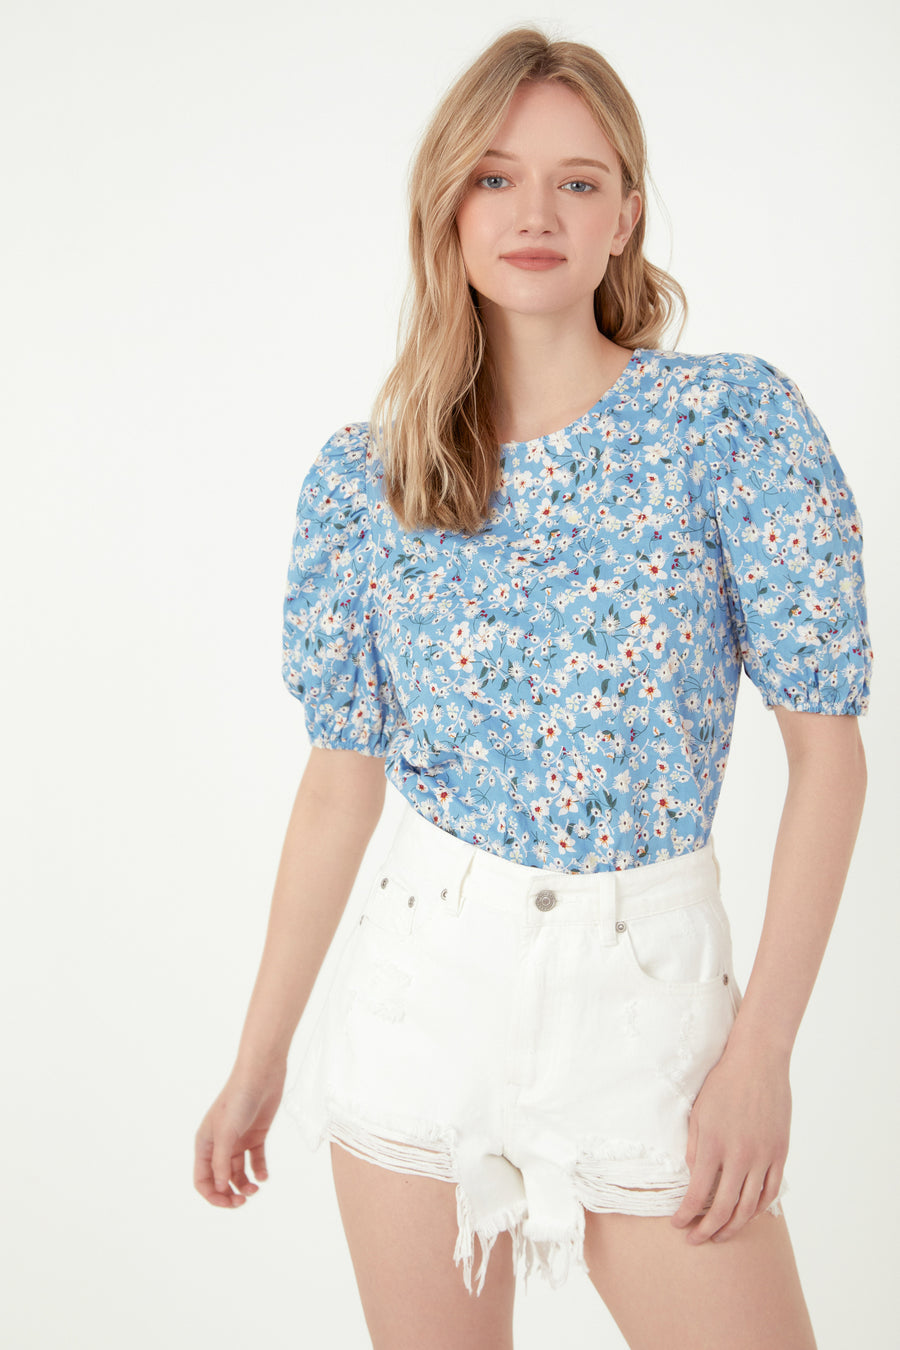 Floral Embroidered Top with Puff Sleeves